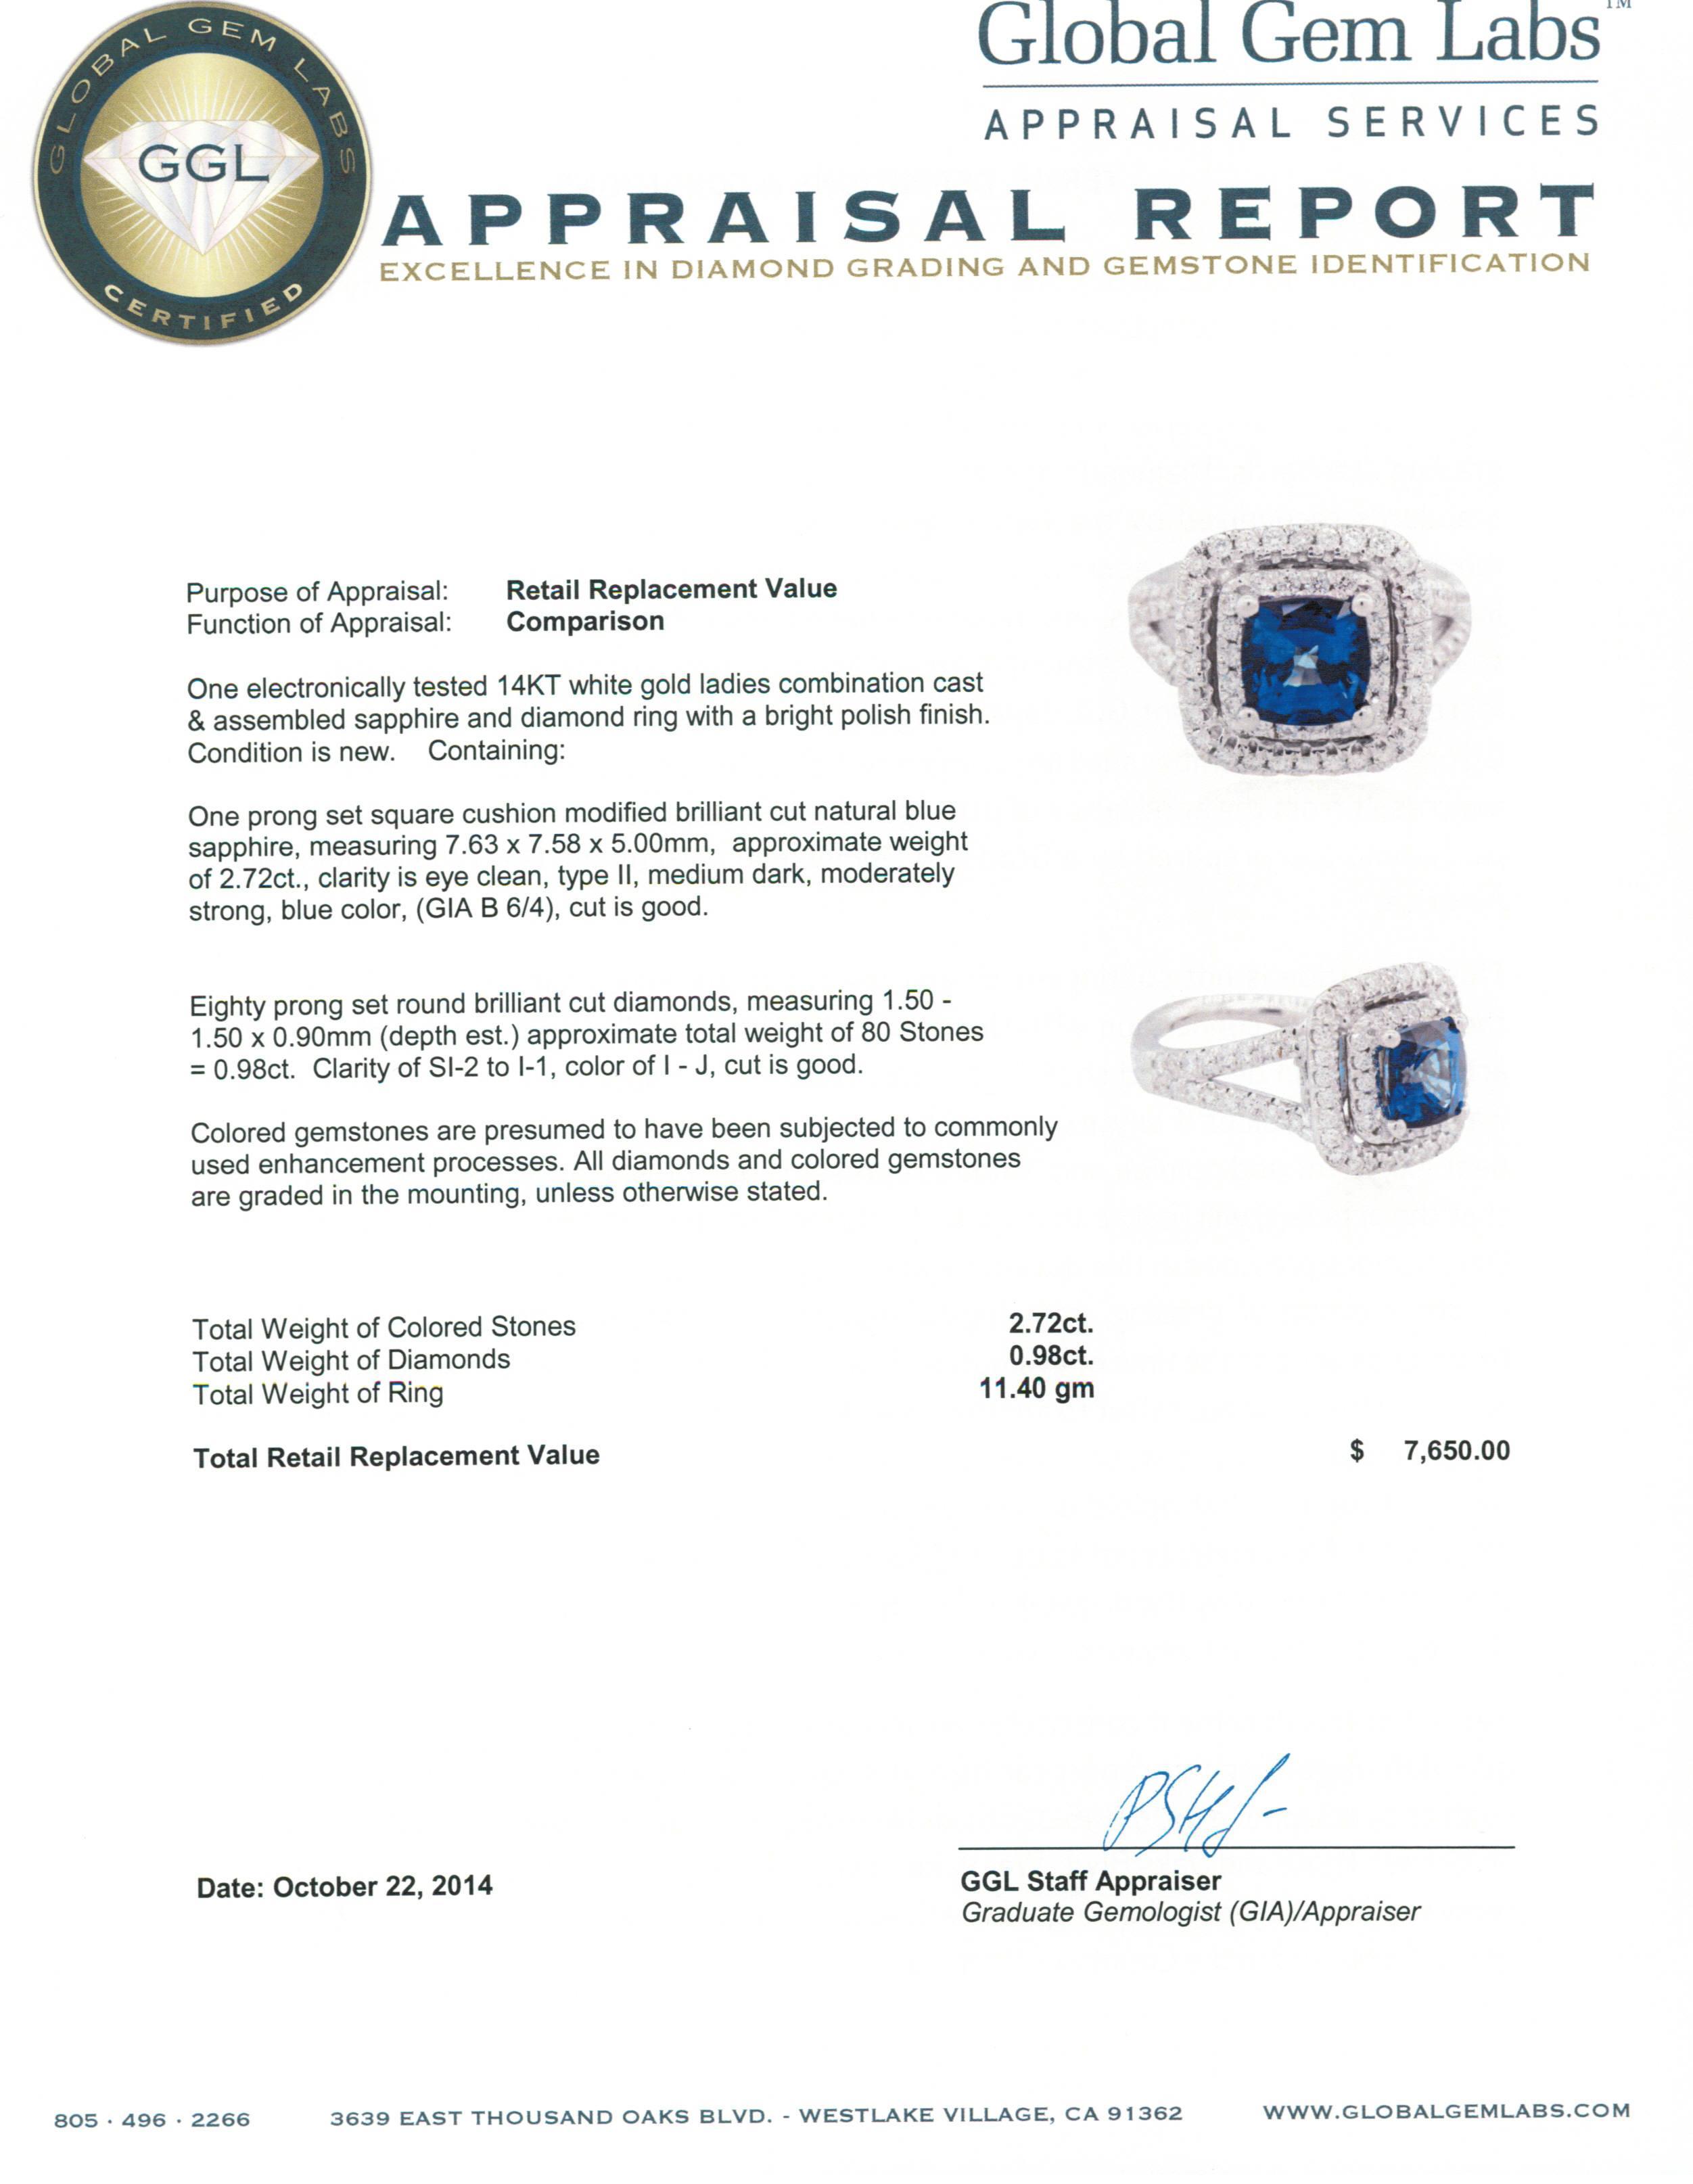 14KT White Gold 2.72 ctw Sapphire and Diamond Ring